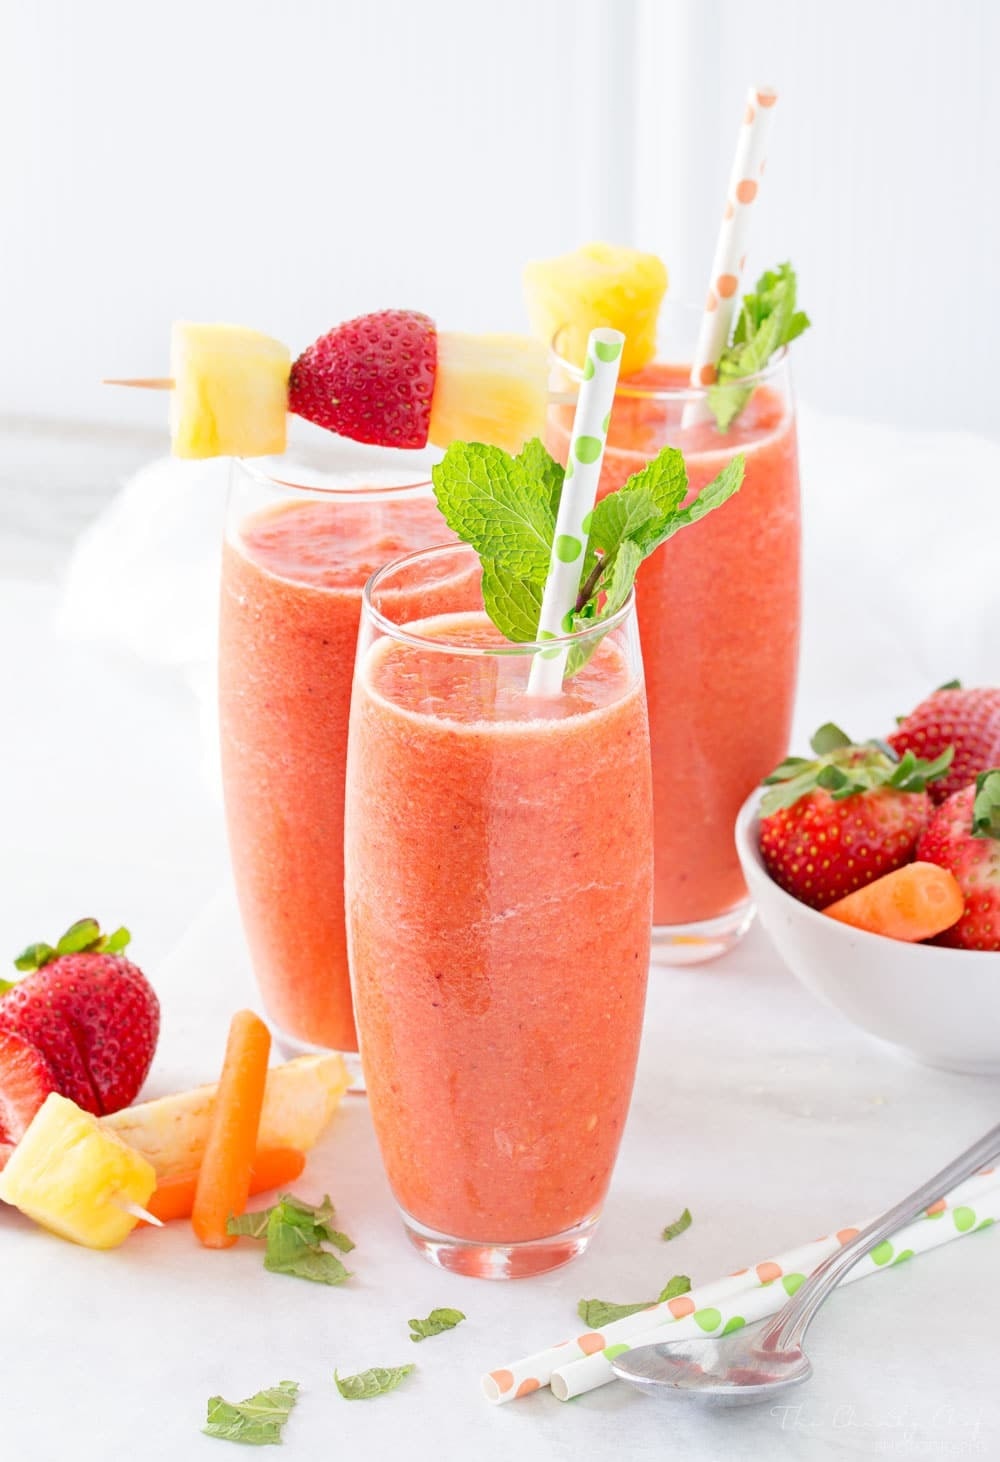 Three tall glasses of Tropical Carrot Smoothie with carrots, strawberries, mango and pineapple chunks